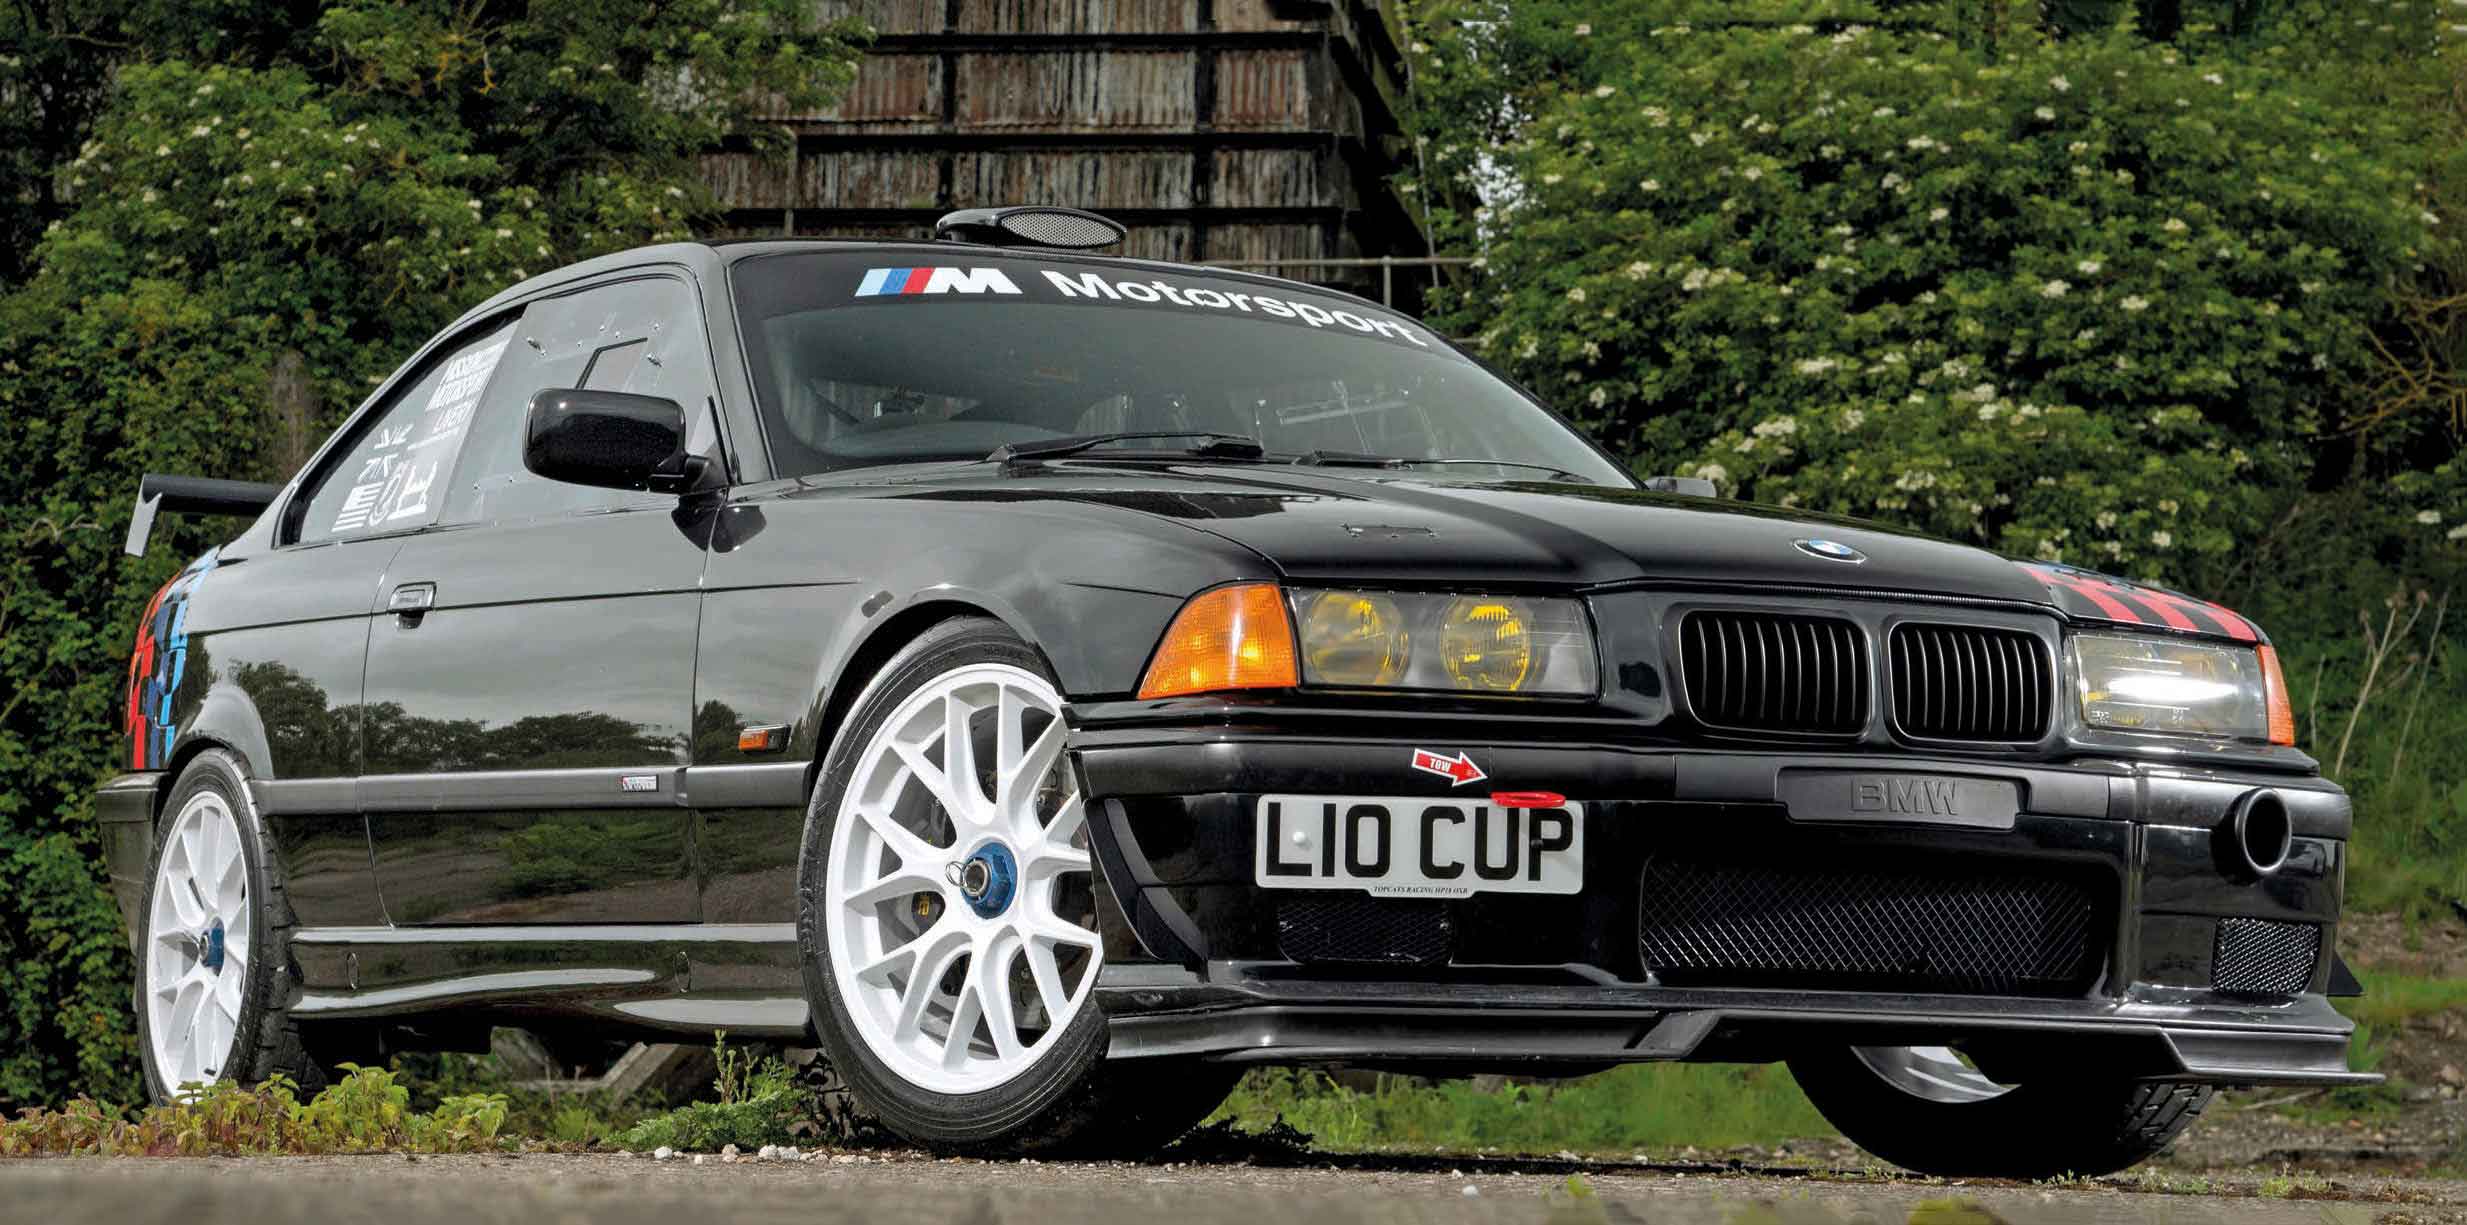 The Epic Tuned Bmw M3 E36 Track Car Road Test Drive My